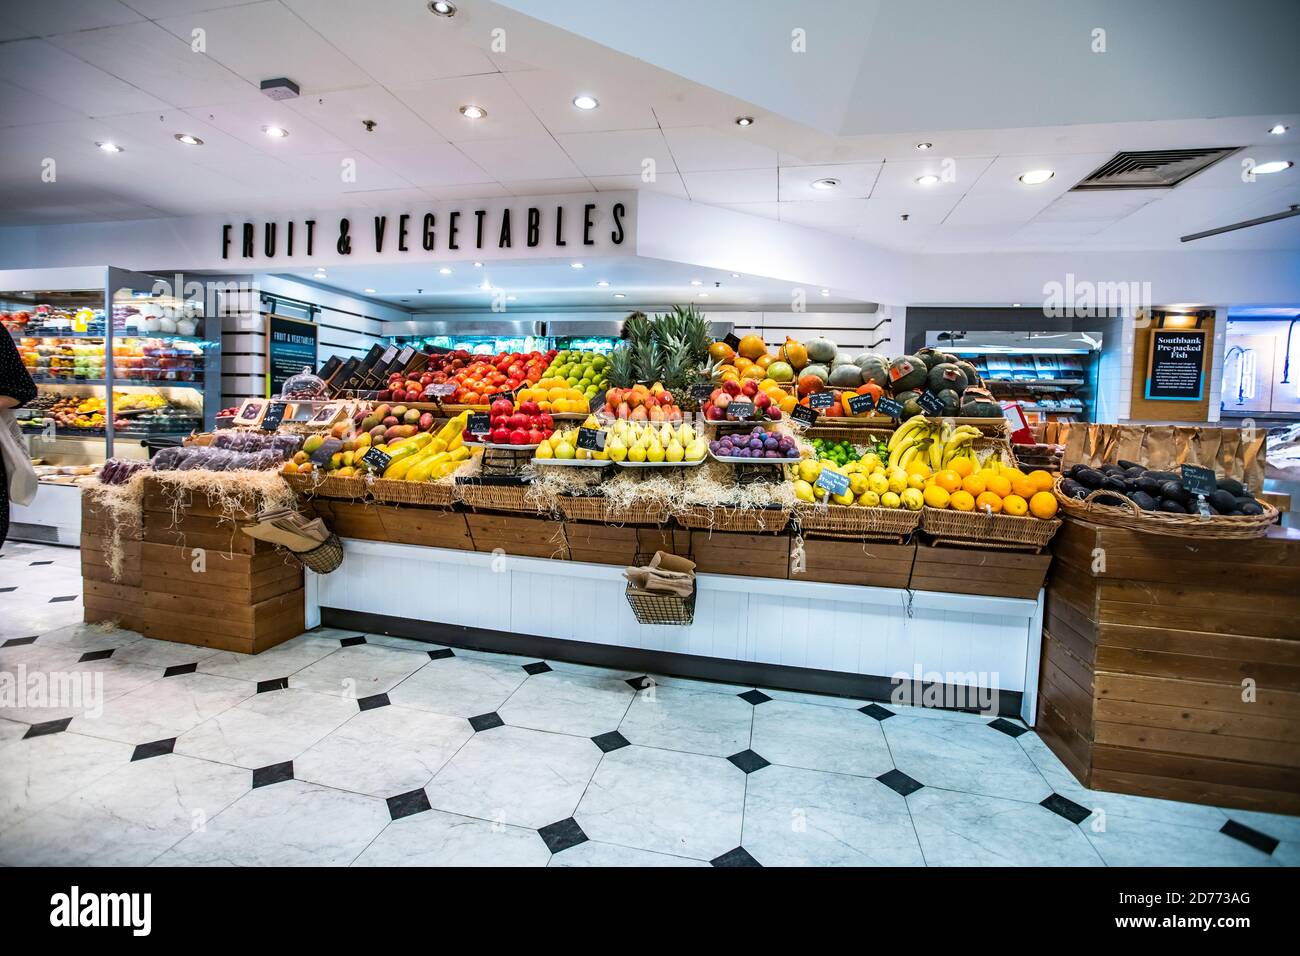 Selfridges food hall London, UK, September 20, 2019: inside a Selfridges food hall in London uk. Posh supermarket grocery with fresh vegetables and fr Stock Photo